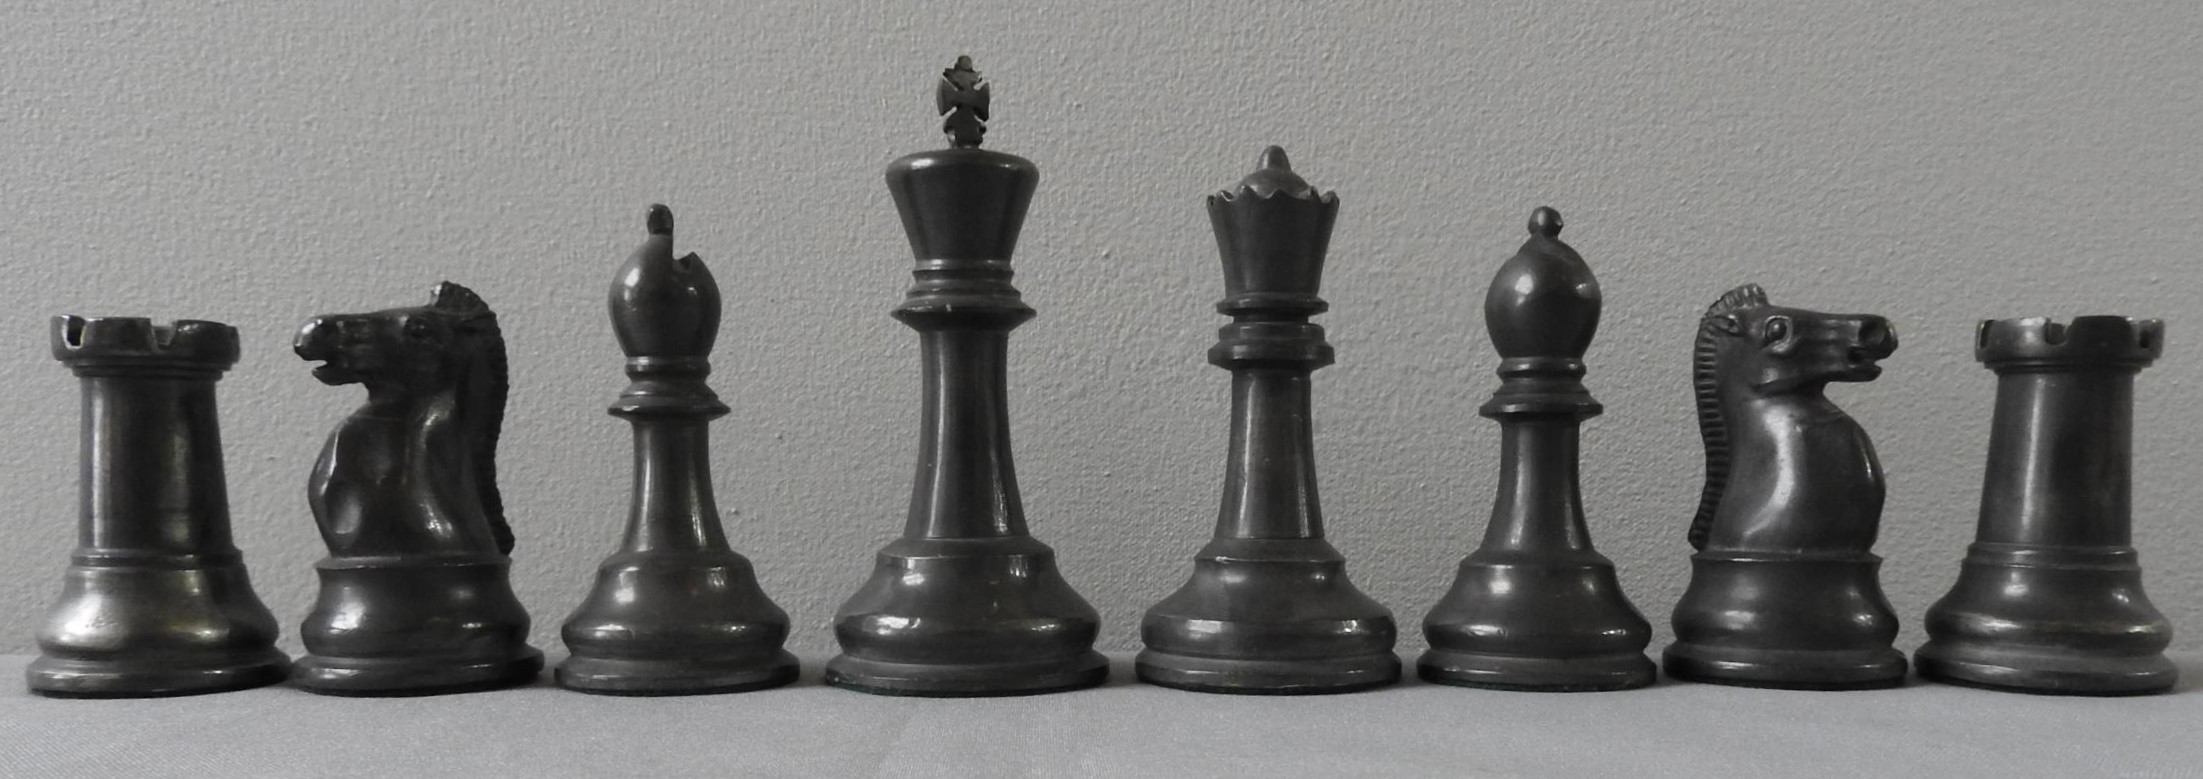 A COMPLETE SET OF 20th CENTURY PEWTER CHESS PIECES - Image 2 of 4